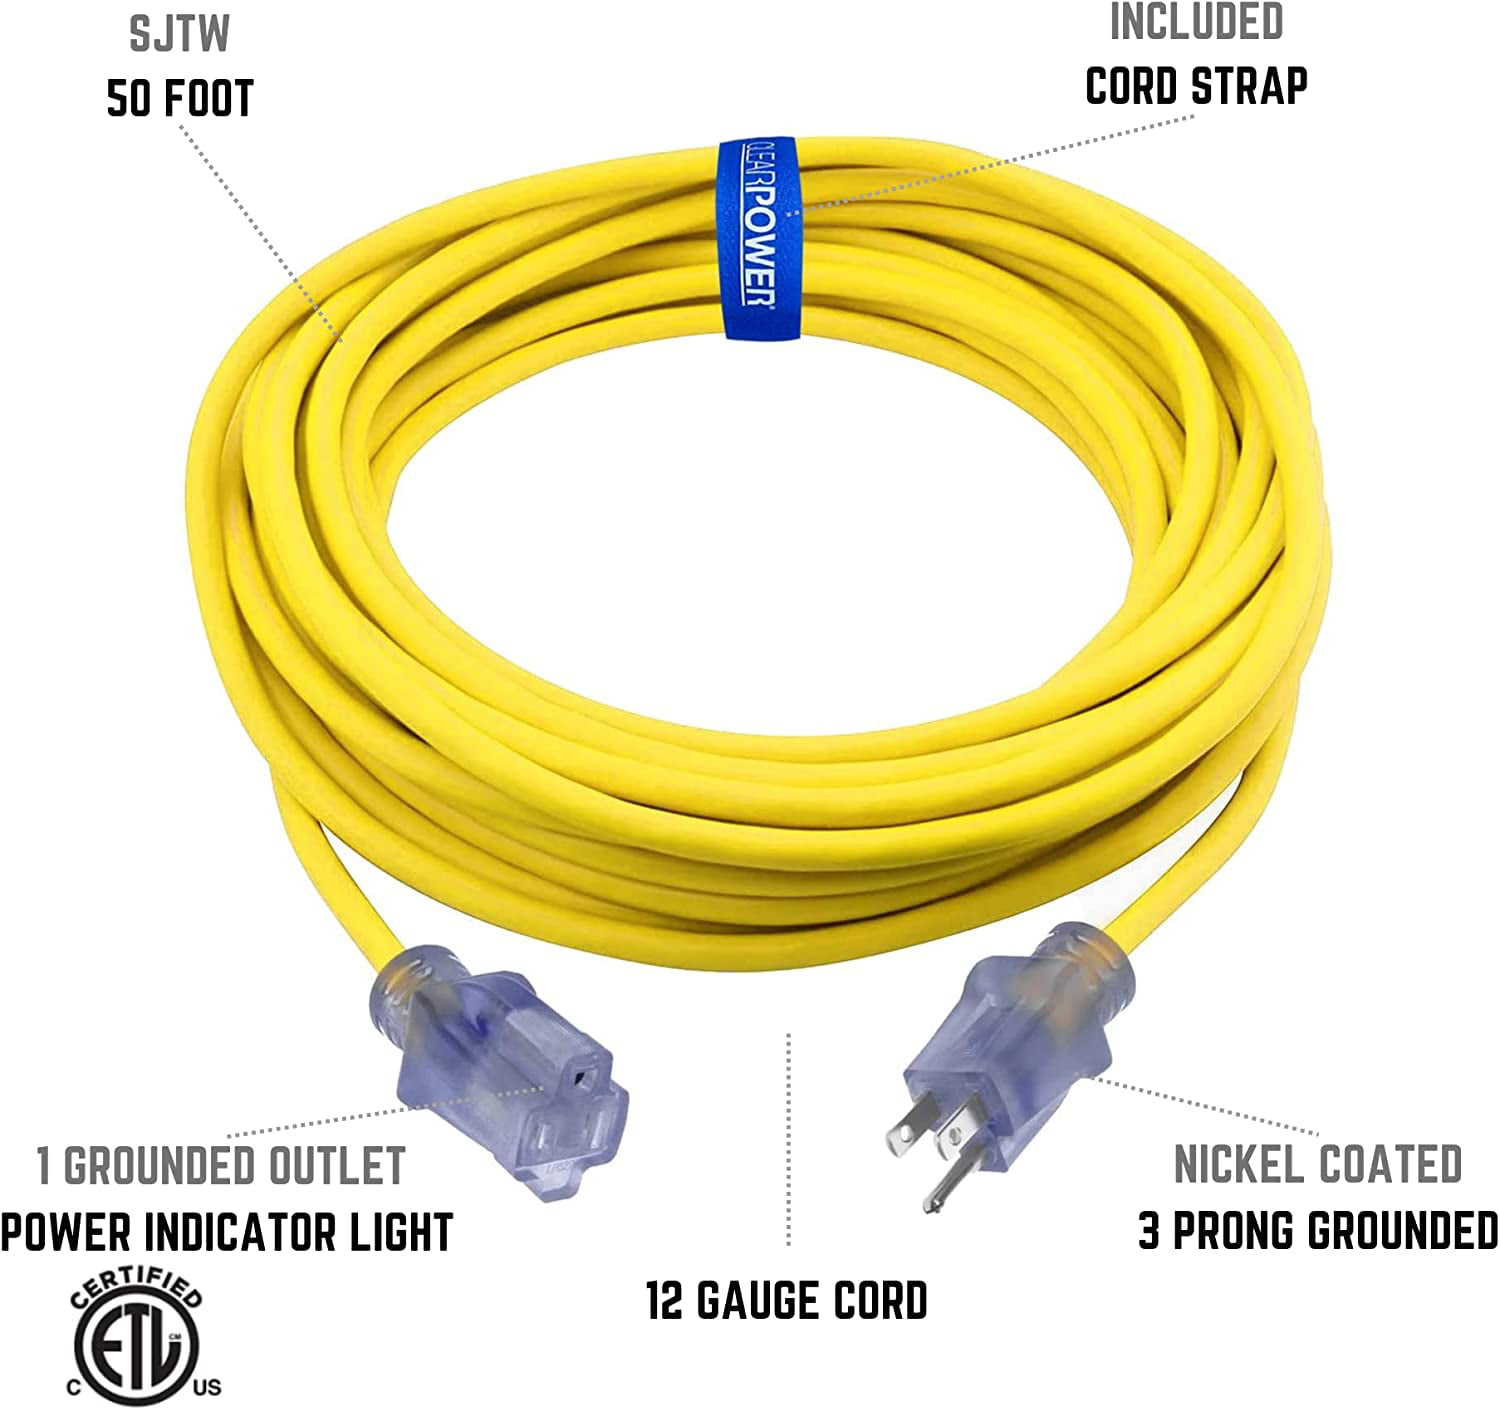 Clear Power 12/3 SJTW 25 ft Outdoor Extension Cord with Power